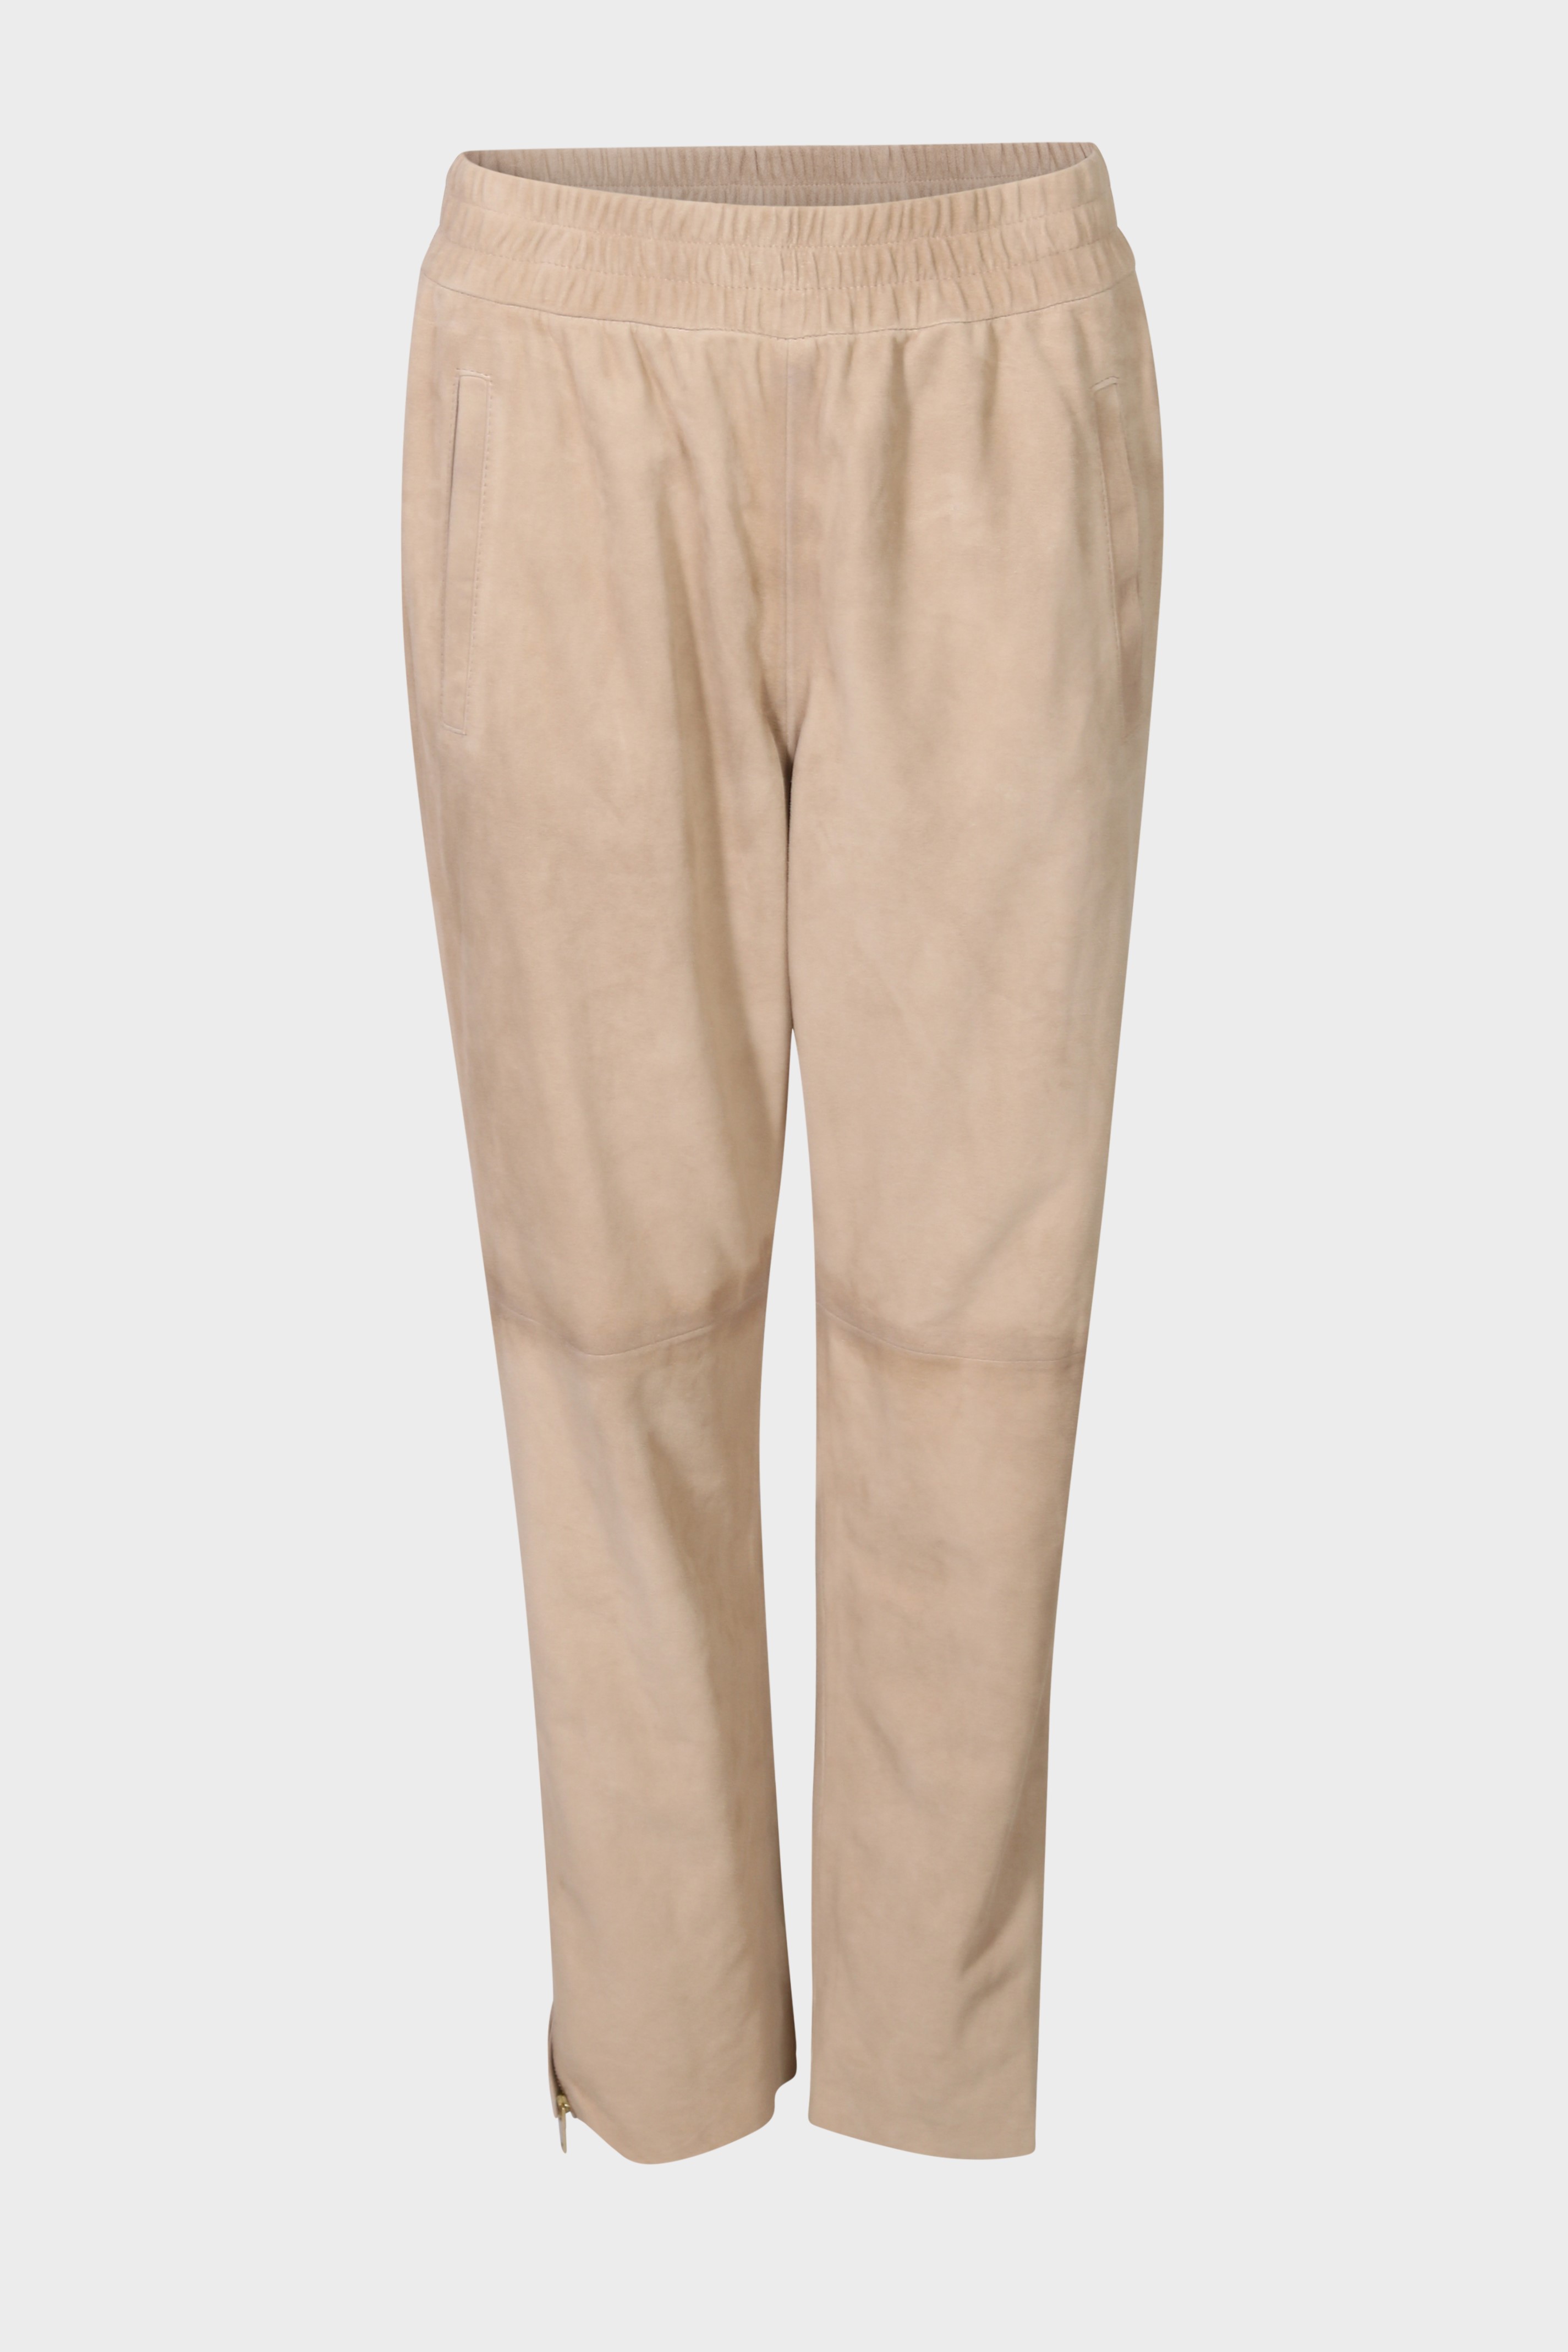 GOLDEN GOOSE Leather Joggpant in Sand